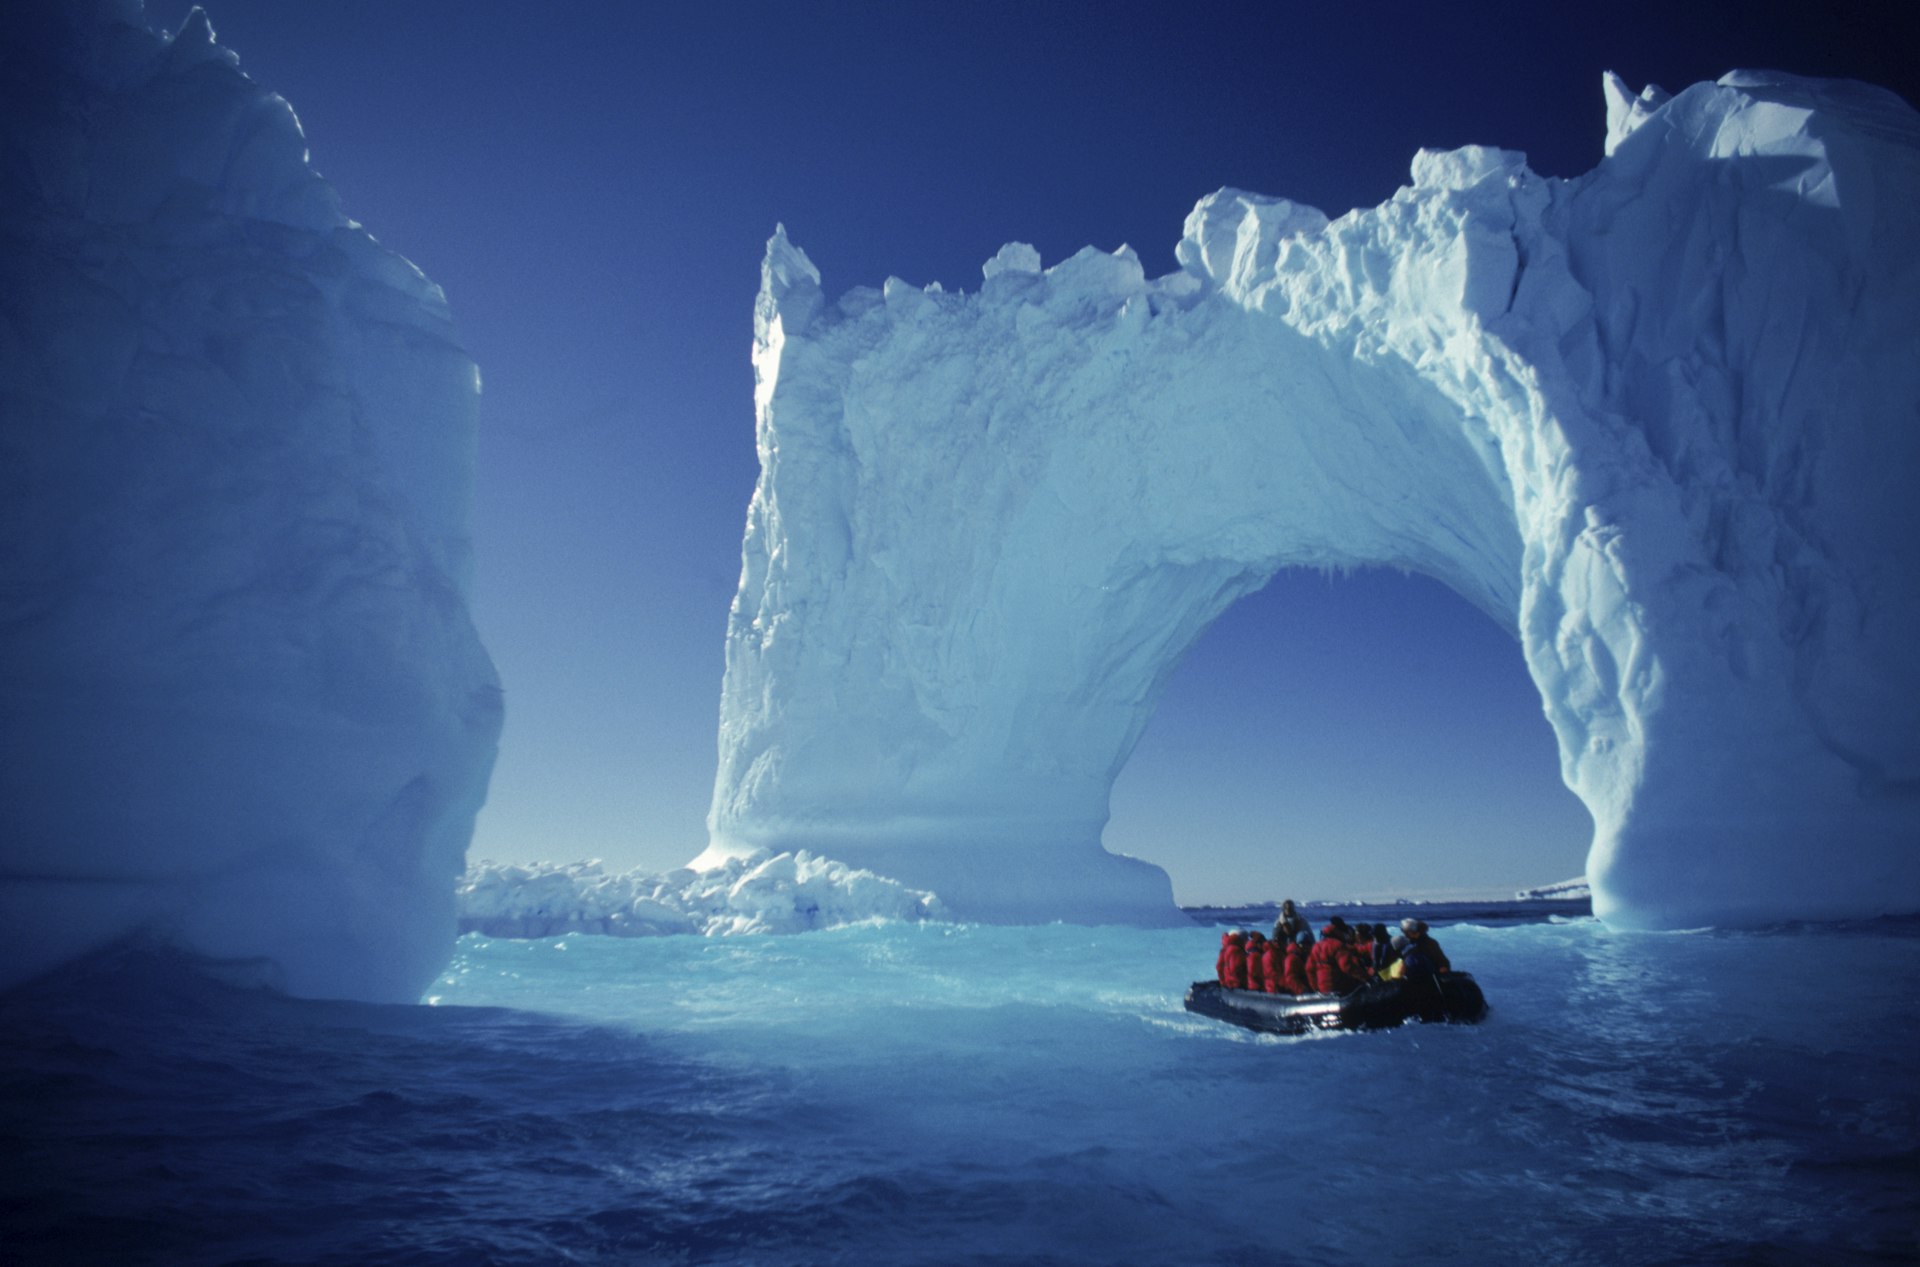 Boating by icebergs in Yalour Islands, Antarctica